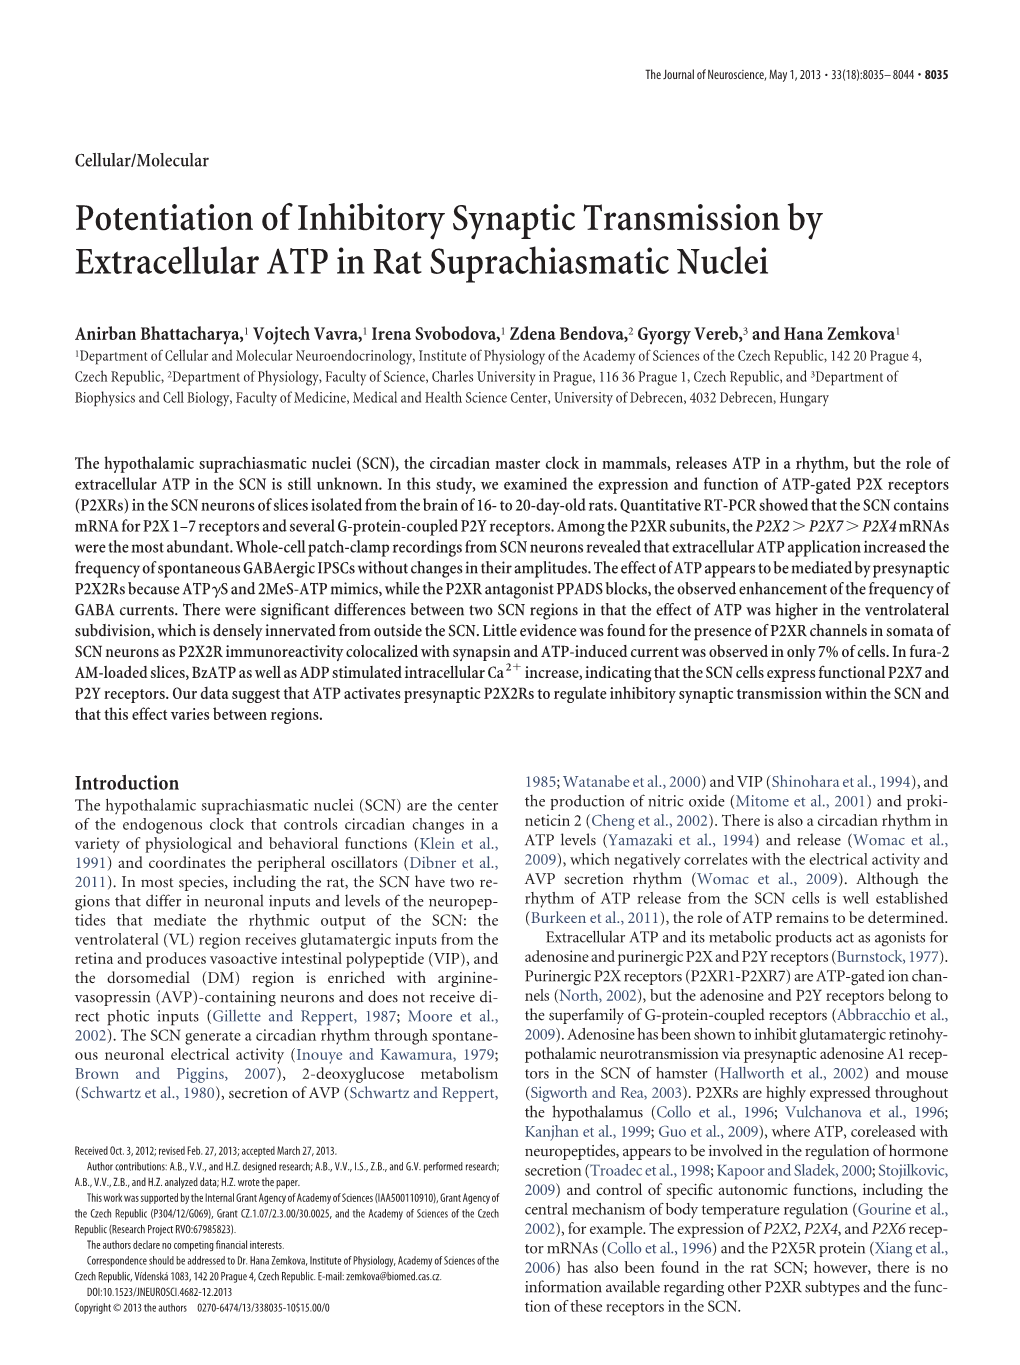 Potentiation of Inhibitory Synaptic Transmission by Extracellular ATP in Rat Suprachiasmatic Nuclei